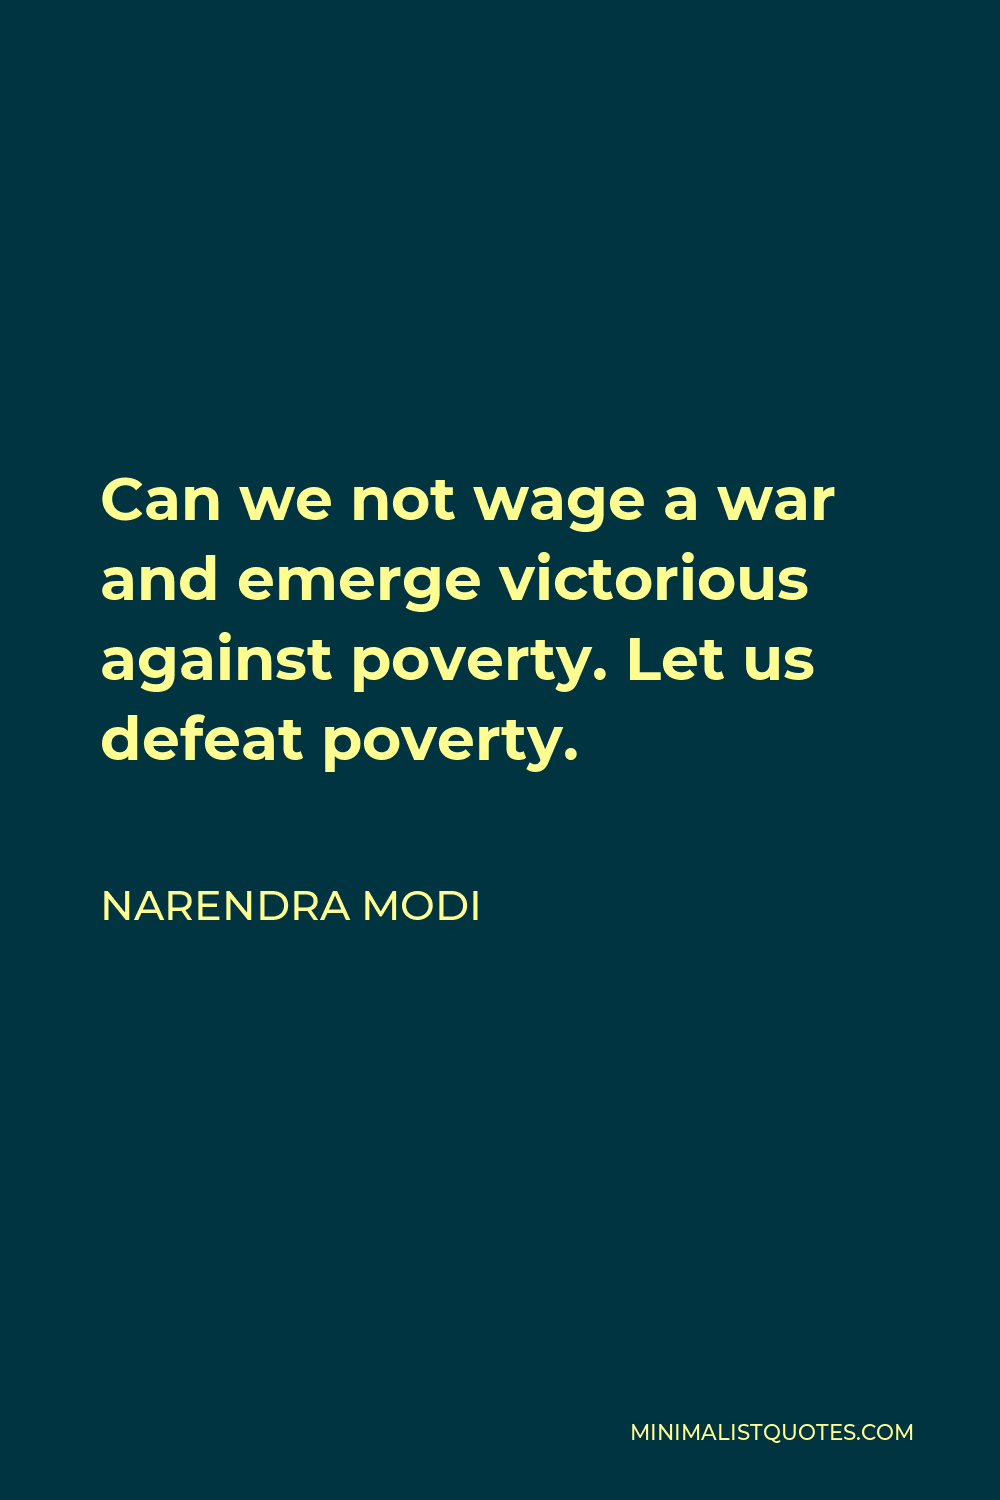 Narendra Modi Quote - Can we not wage a war and emerge victorious against poverty. Let us defeat poverty.